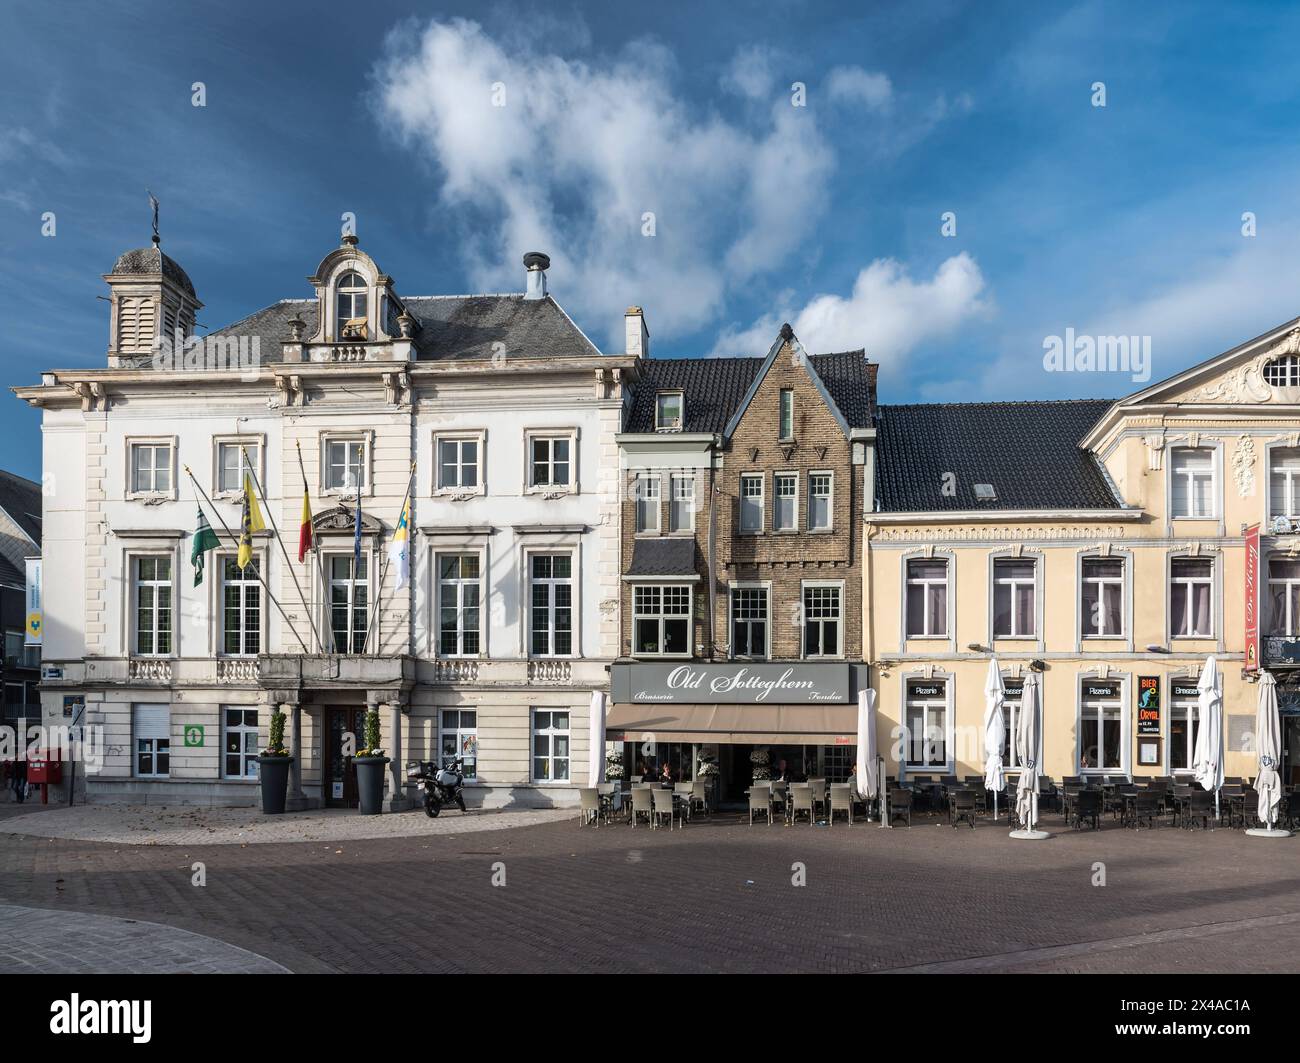 Zottegem, East Flanders, Belgium, October 25, 2017 - Old market square and town hall Stock Photo